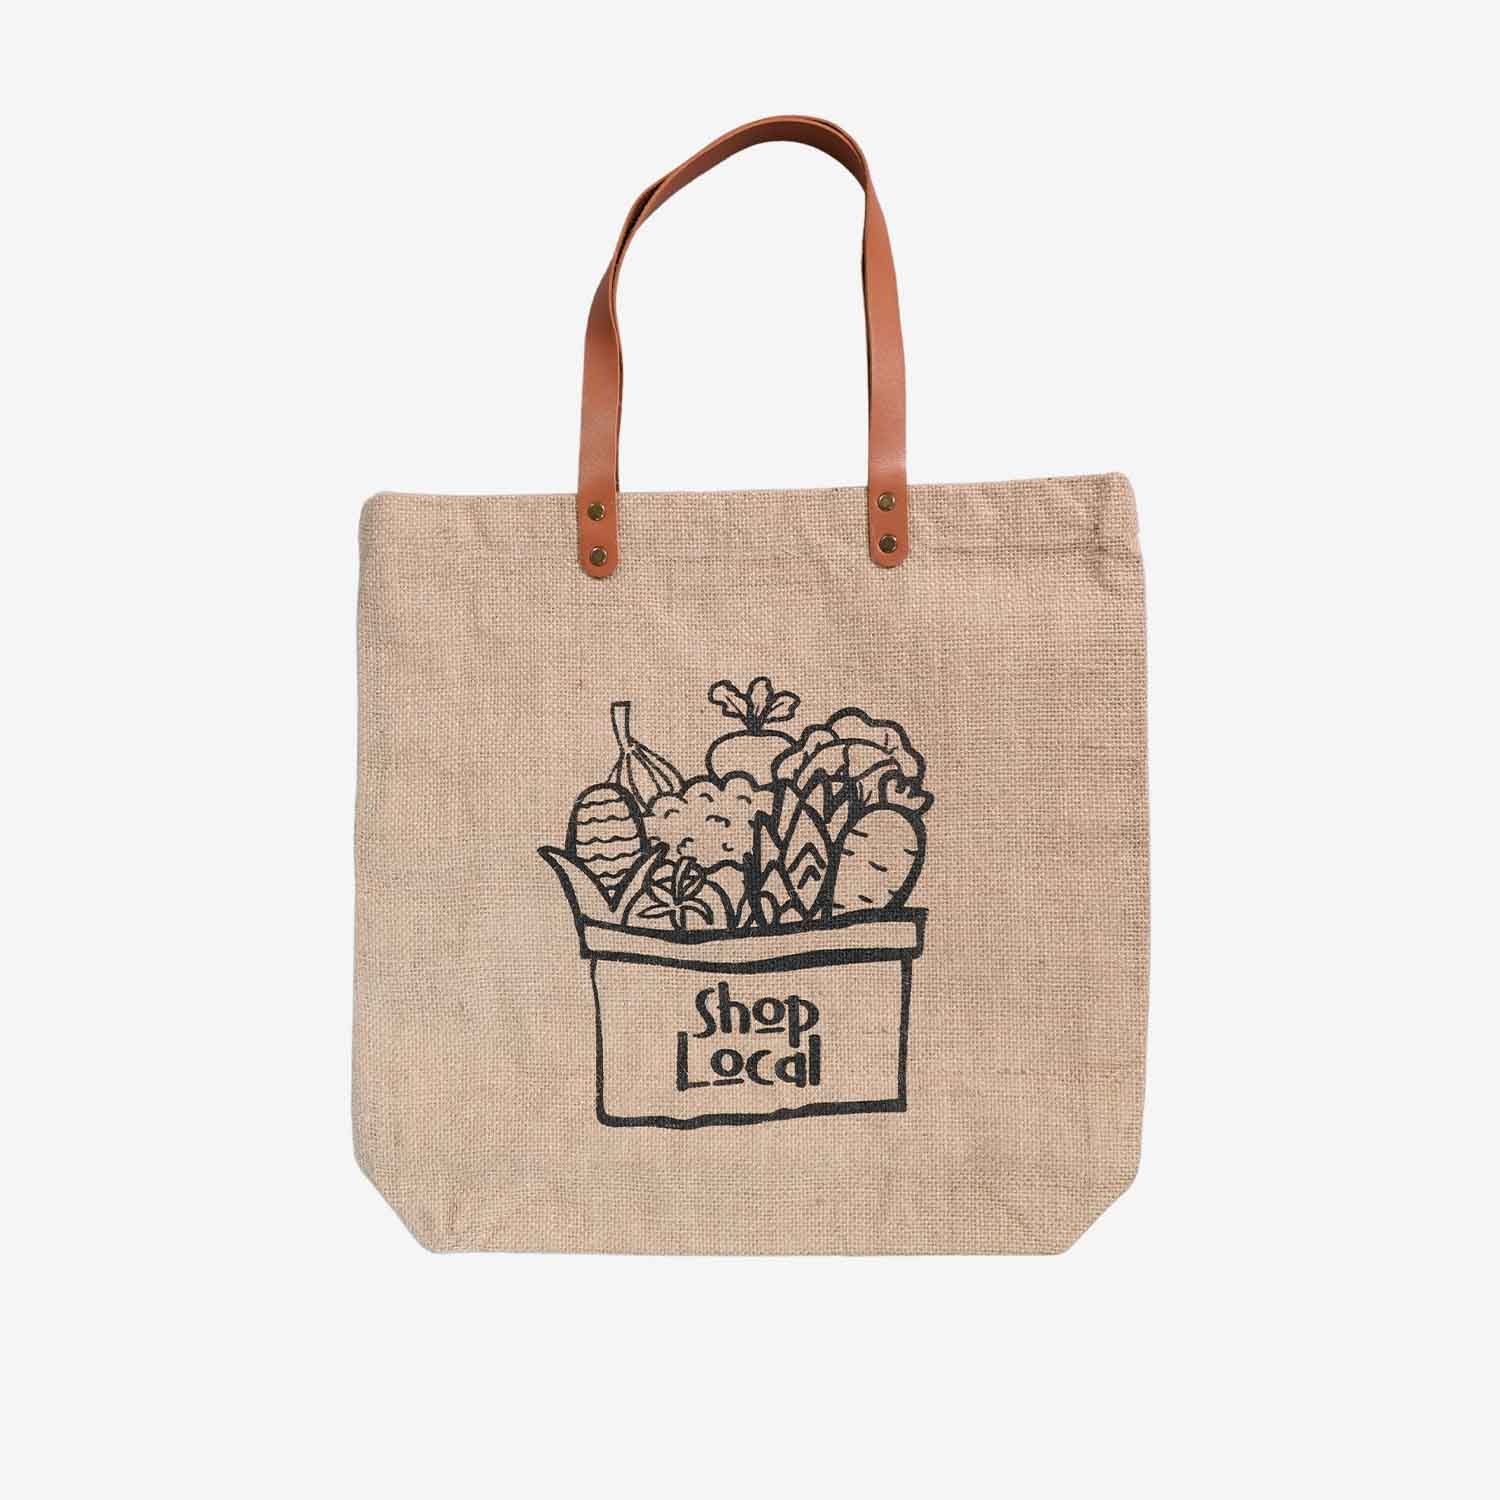 Kultura Local Produce Box Jute with Leather Strap Tote Bag